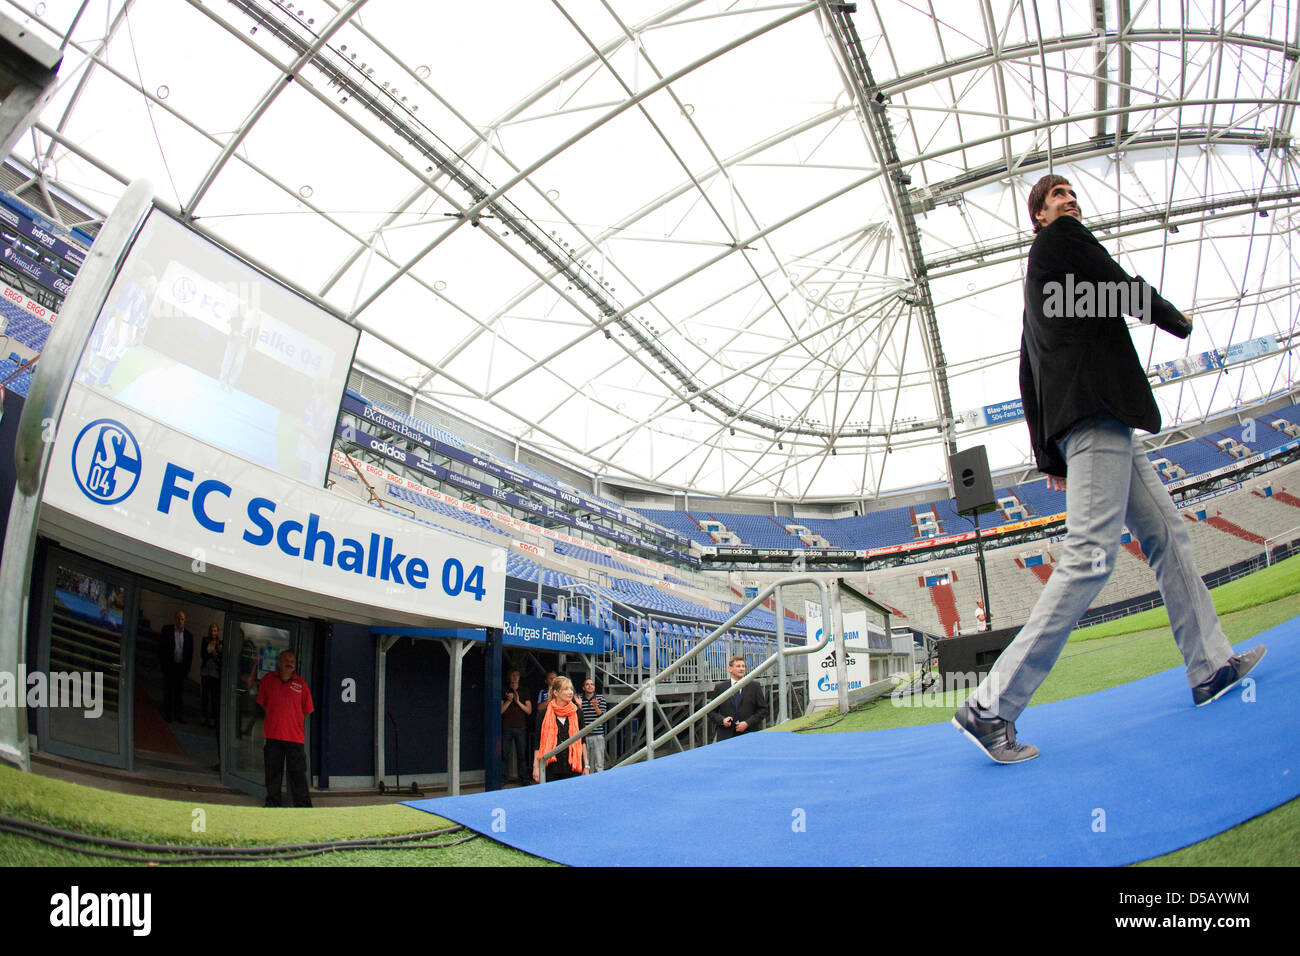 Spanish soccer player Raul enters the soccer stadium on his way to his official introduction to the Bundesliga soccer club FC Schalke 04 at the Veltins-Arena soccer stadium in Gelsenkirchen, Germany, 28 July 2010. 33-year old Raul was singed on a two-year contract, the soccer club disclosed. Photo: ROLF VENNENBERND Stock Photo